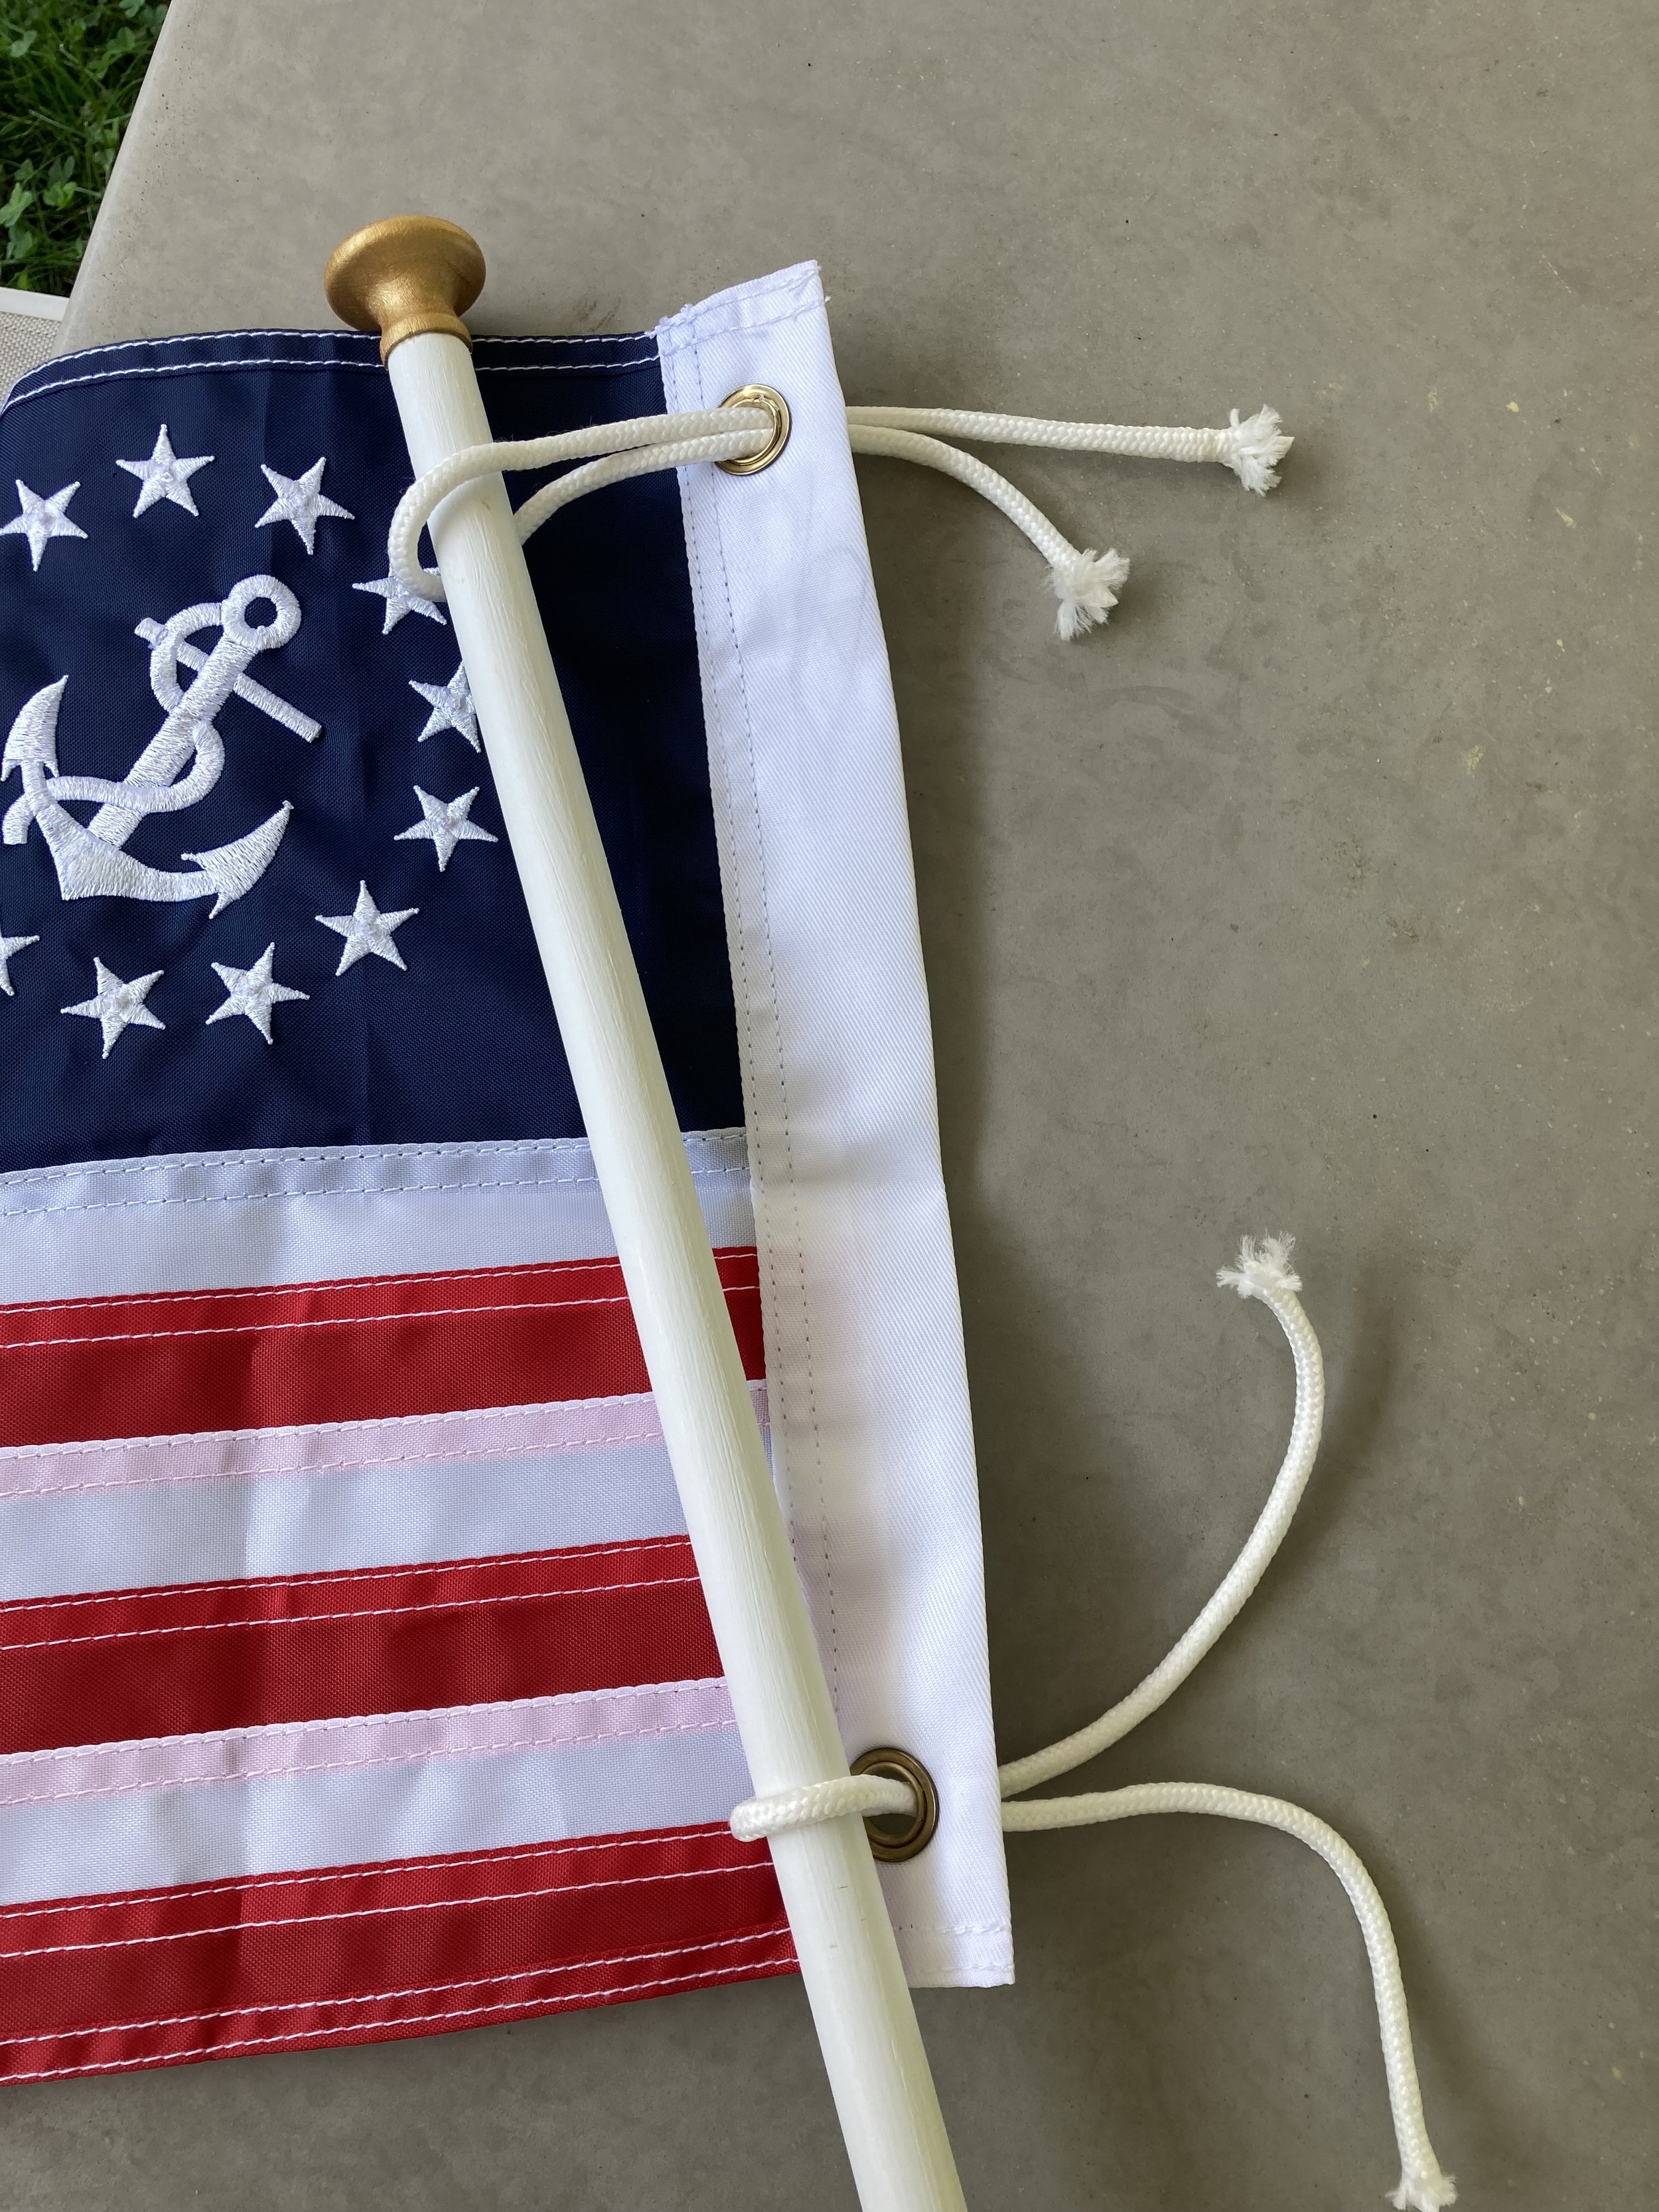 Attaching flag to flag pole